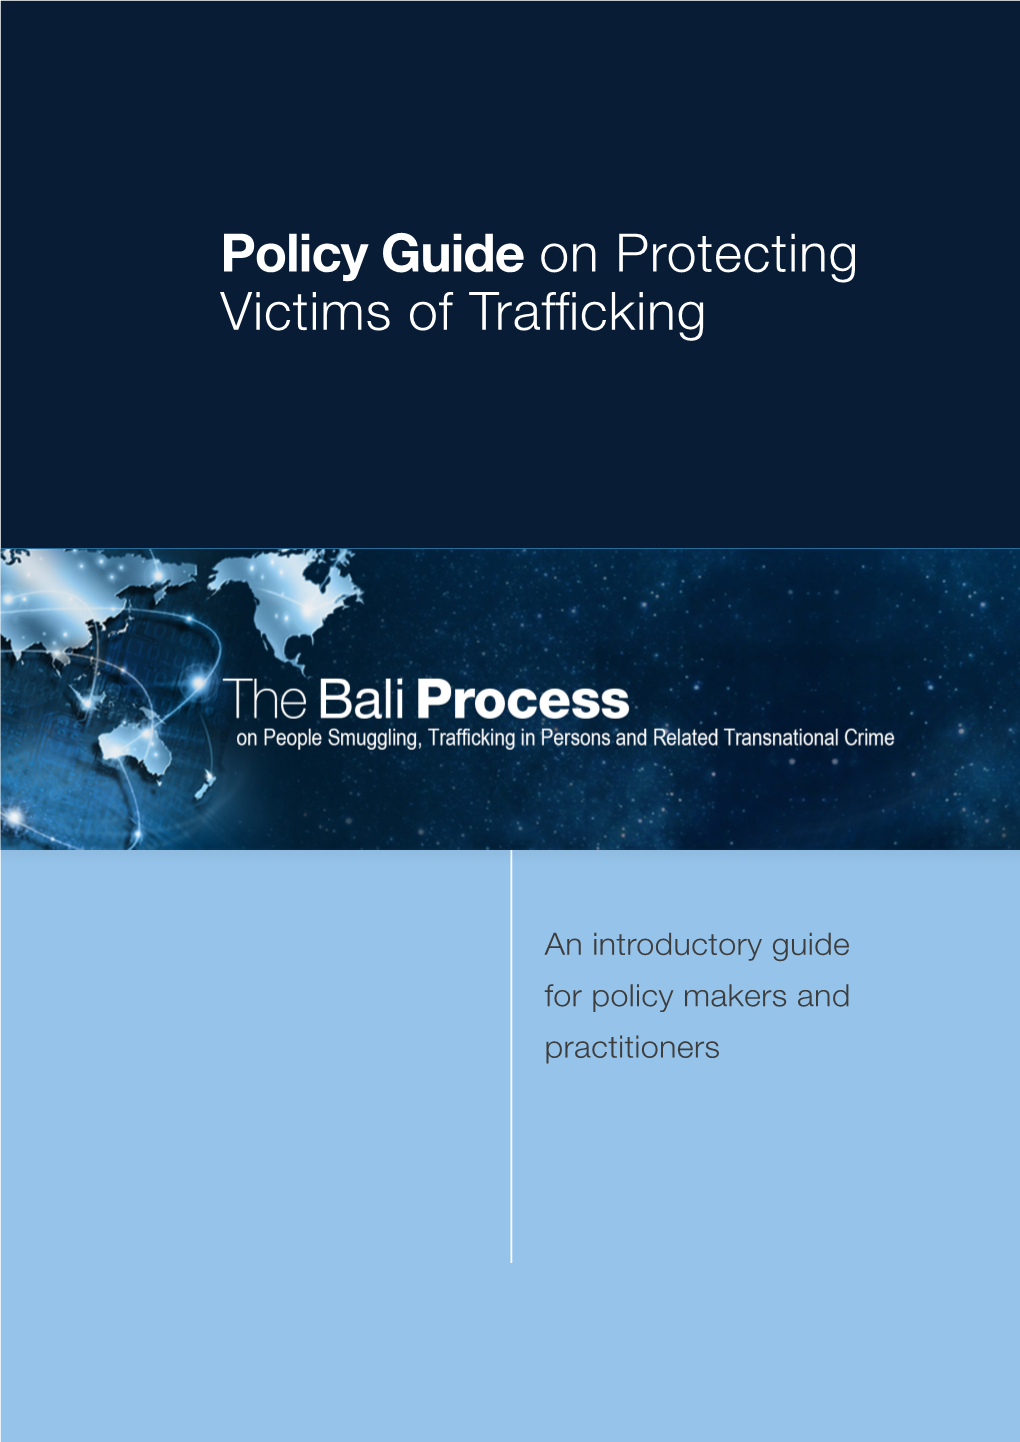 Policy Guide on Protecting Victims of Trafficking